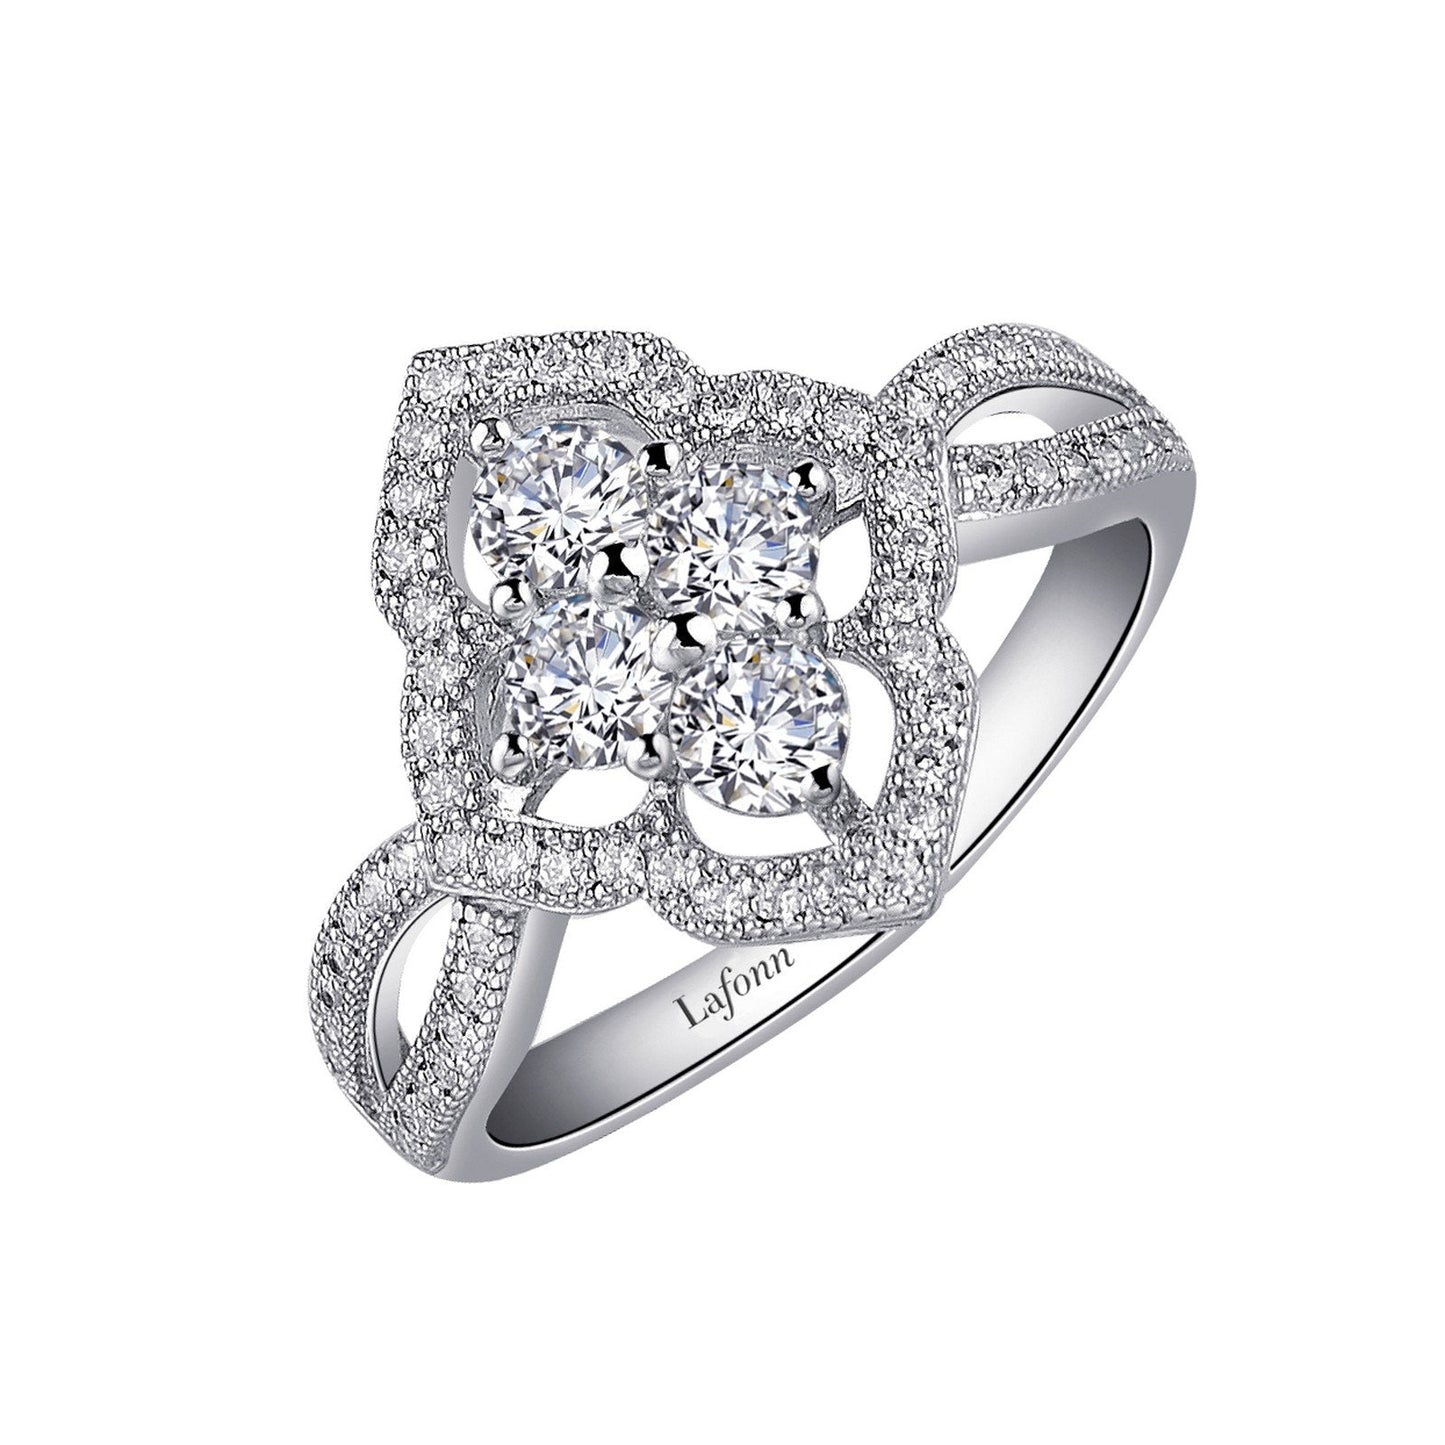 Load image into Gallery viewer, LaFonn Platinum Simulated Diamond N/A RINGS Art Nouveau Inspired Ring
